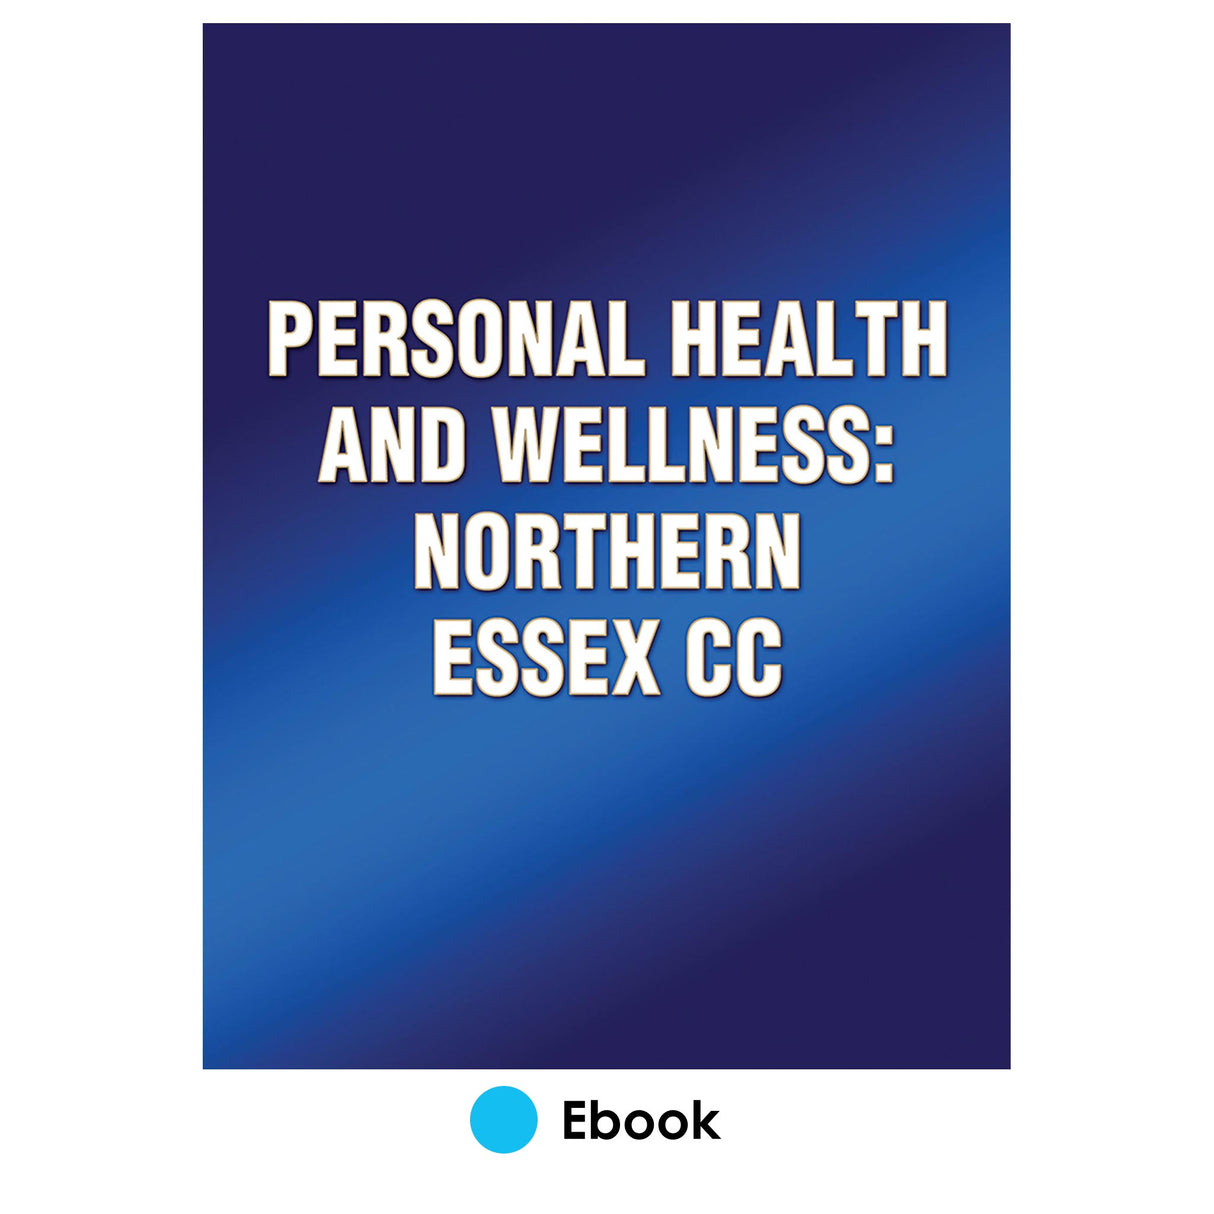 Personal Health and Wellness: Northern Essex CC